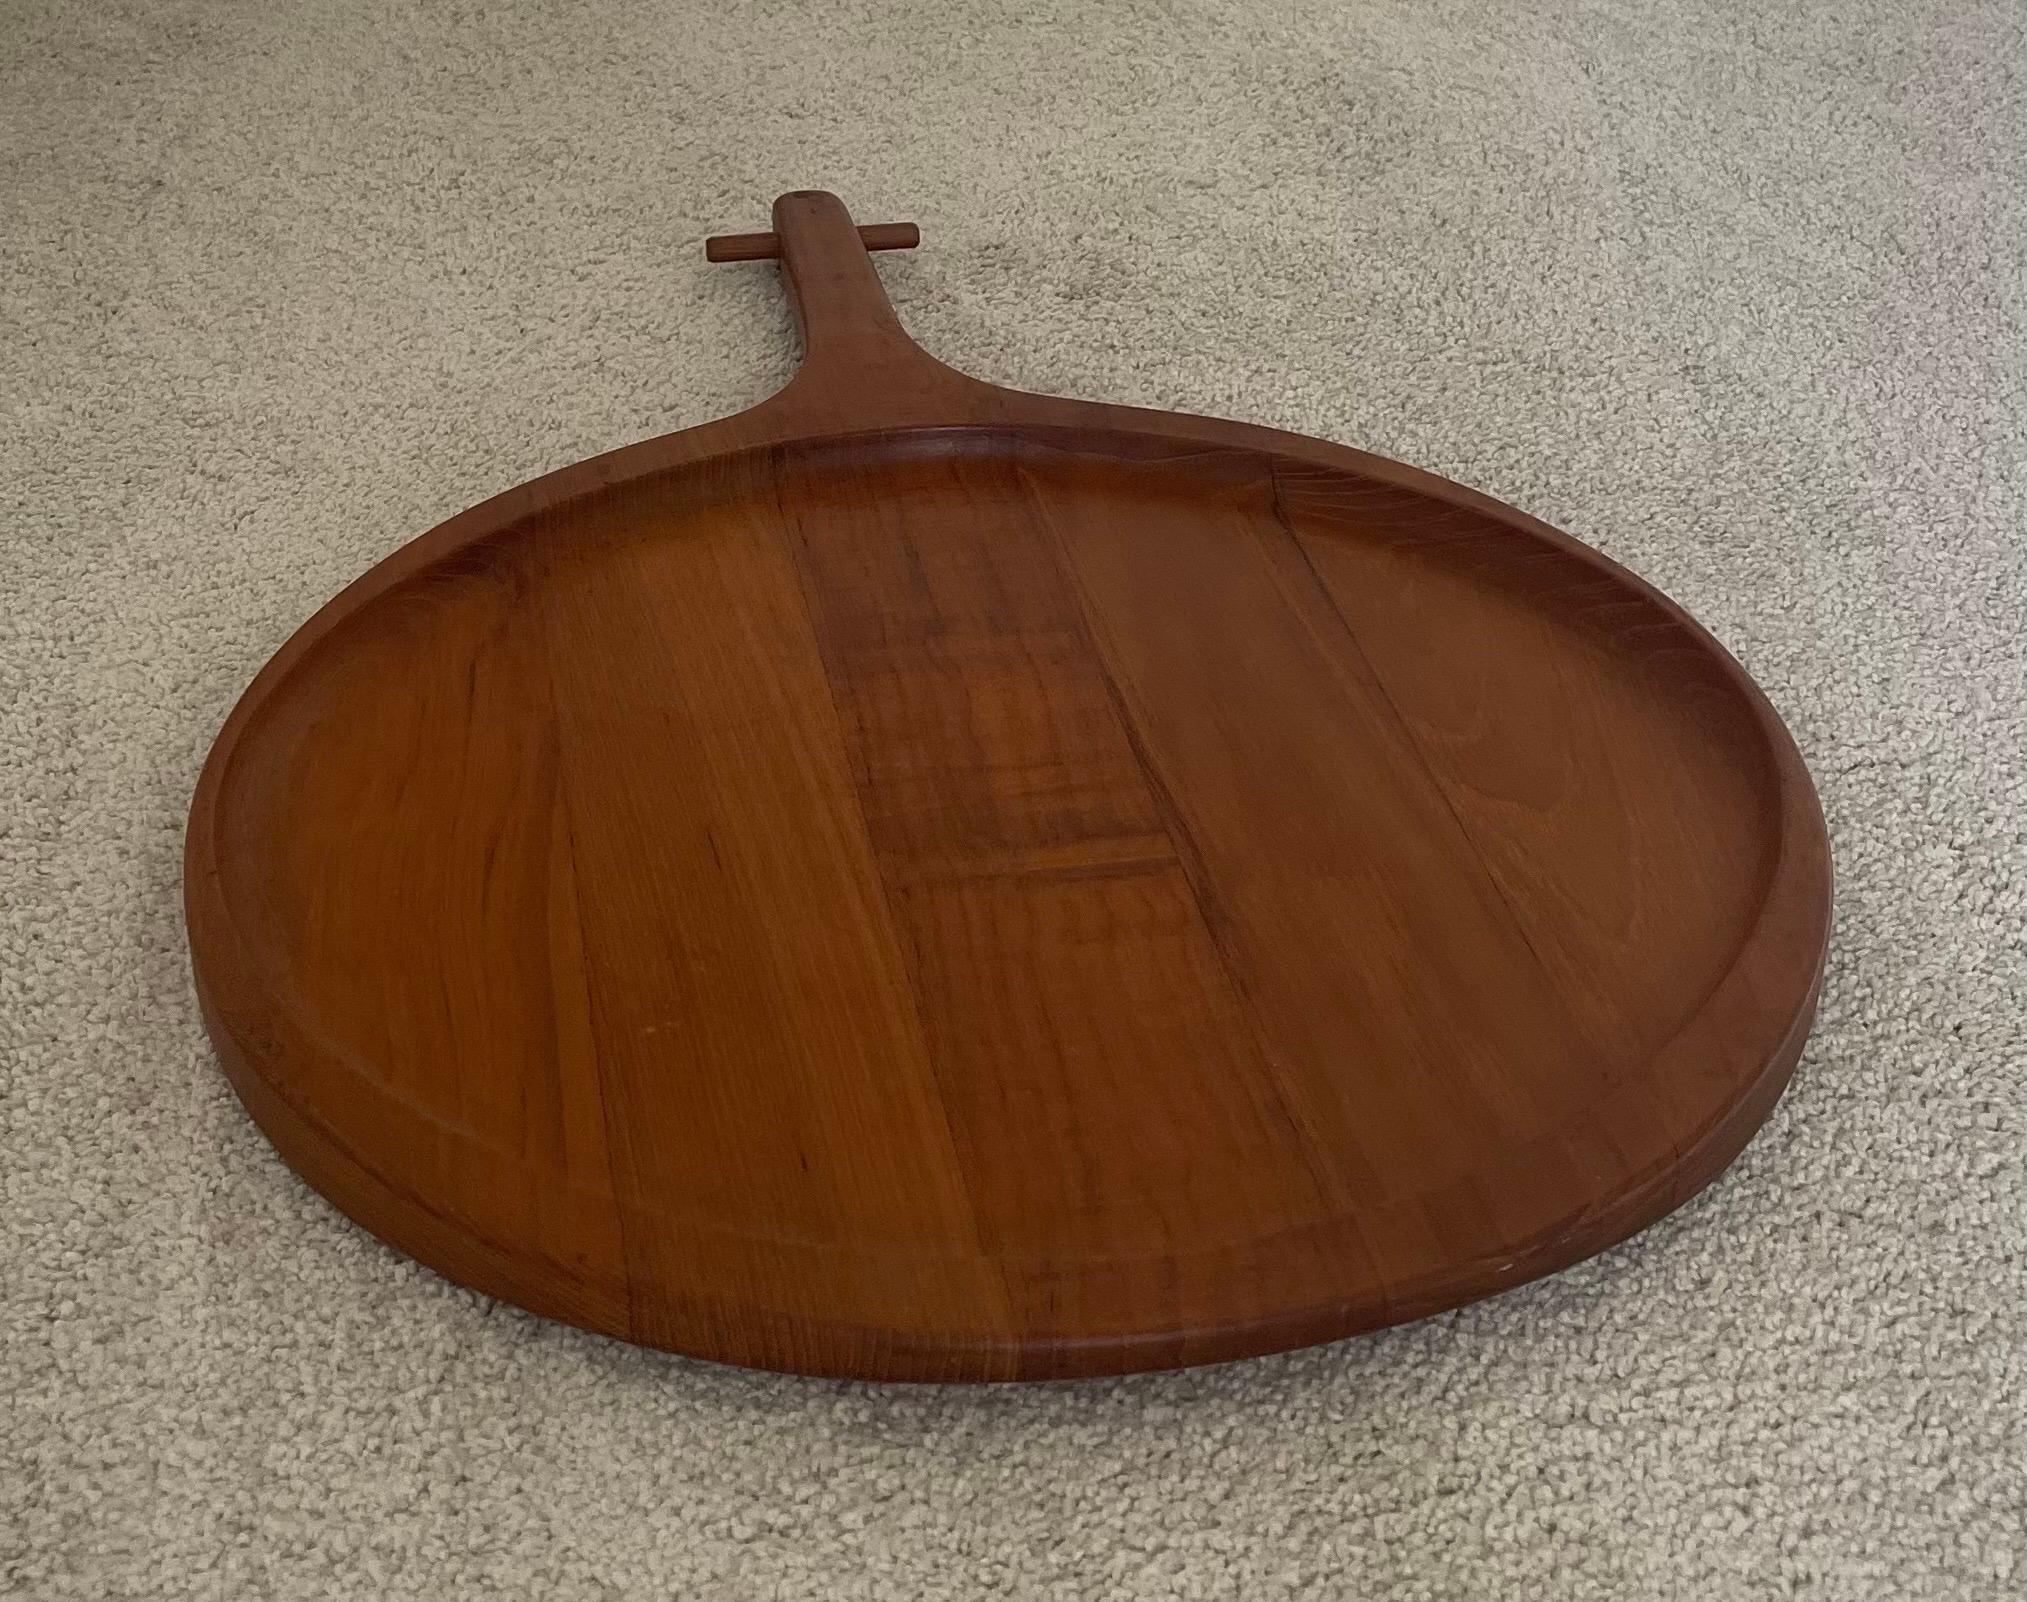 Staved Teak Tray or Cutting Board by Sigvard Nilsson for a.B. Sowe Konst In Good Condition For Sale In San Diego, CA